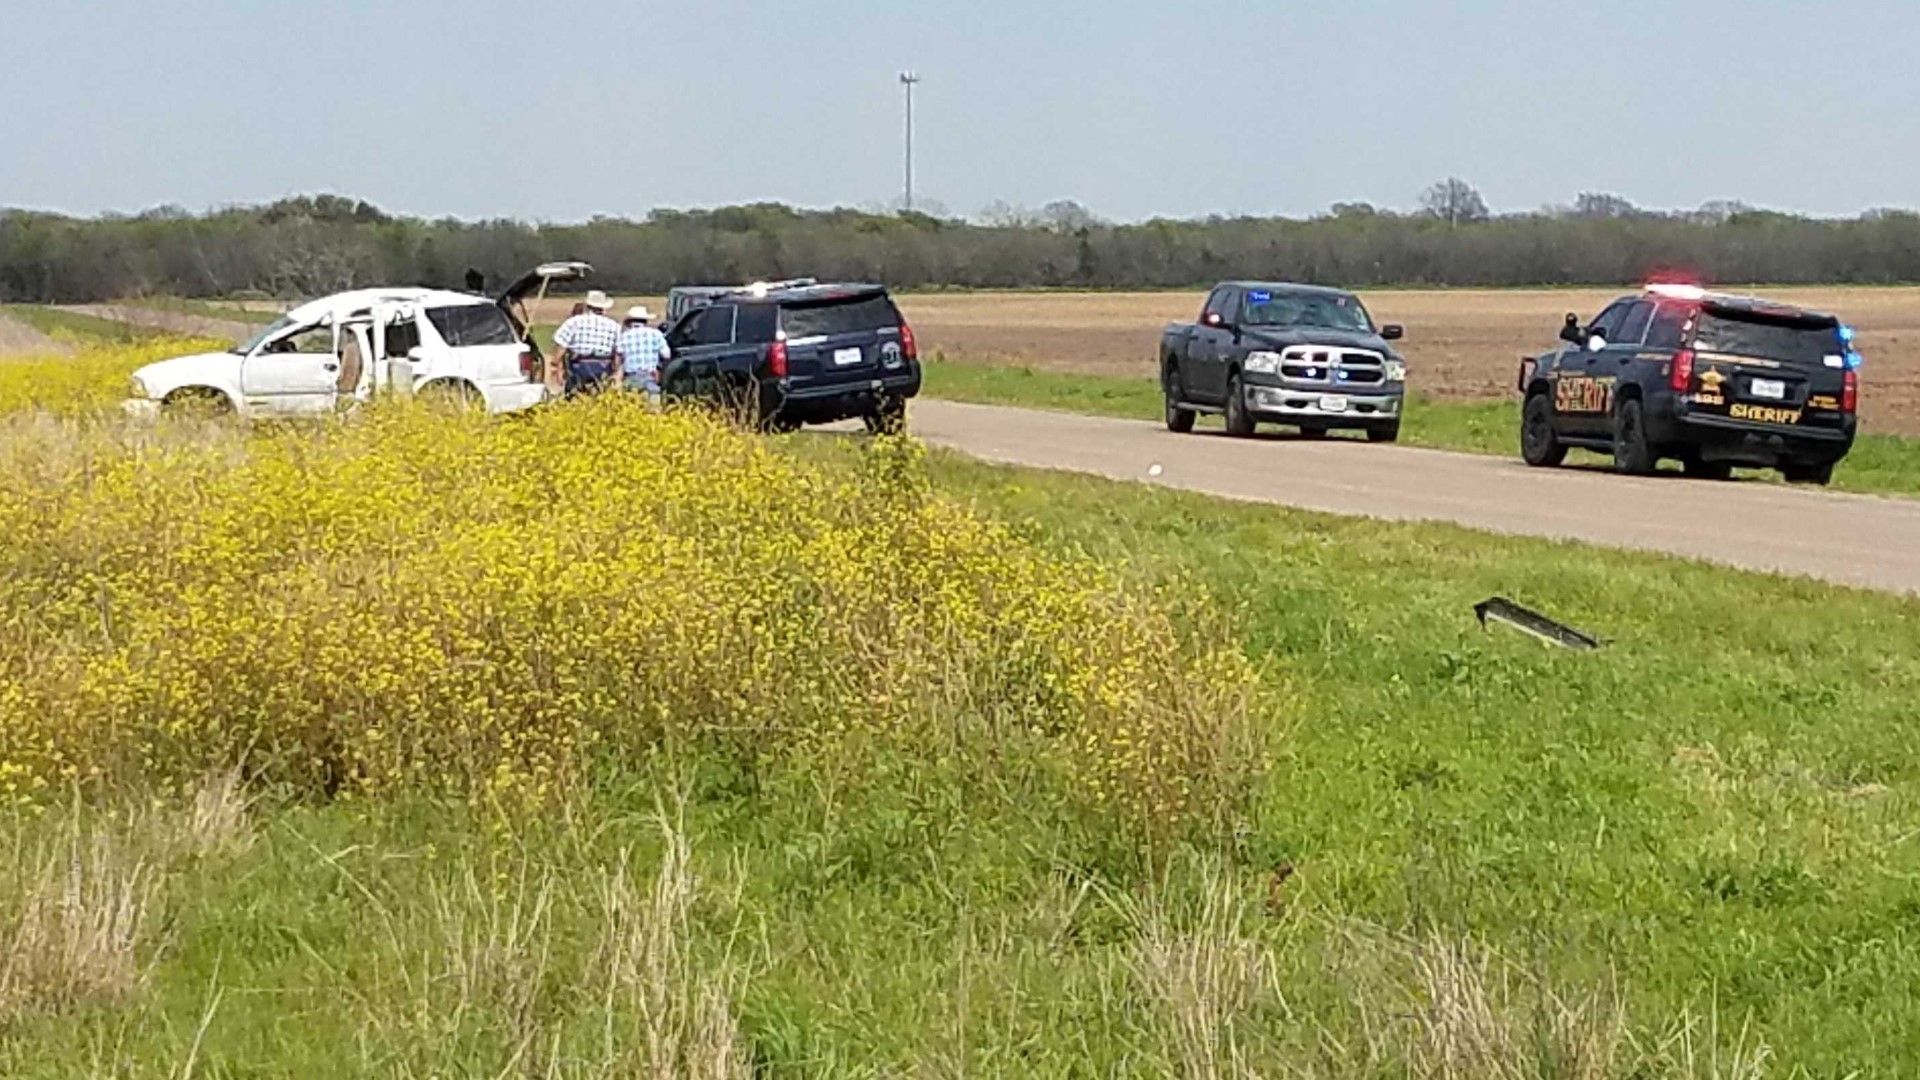 Waco police said by the time it was all said and done the man had stolen two vehicles, including an unmarked Waco police car, threatened someone with an axe and led four law enforcement agencies on a chase cross the county.